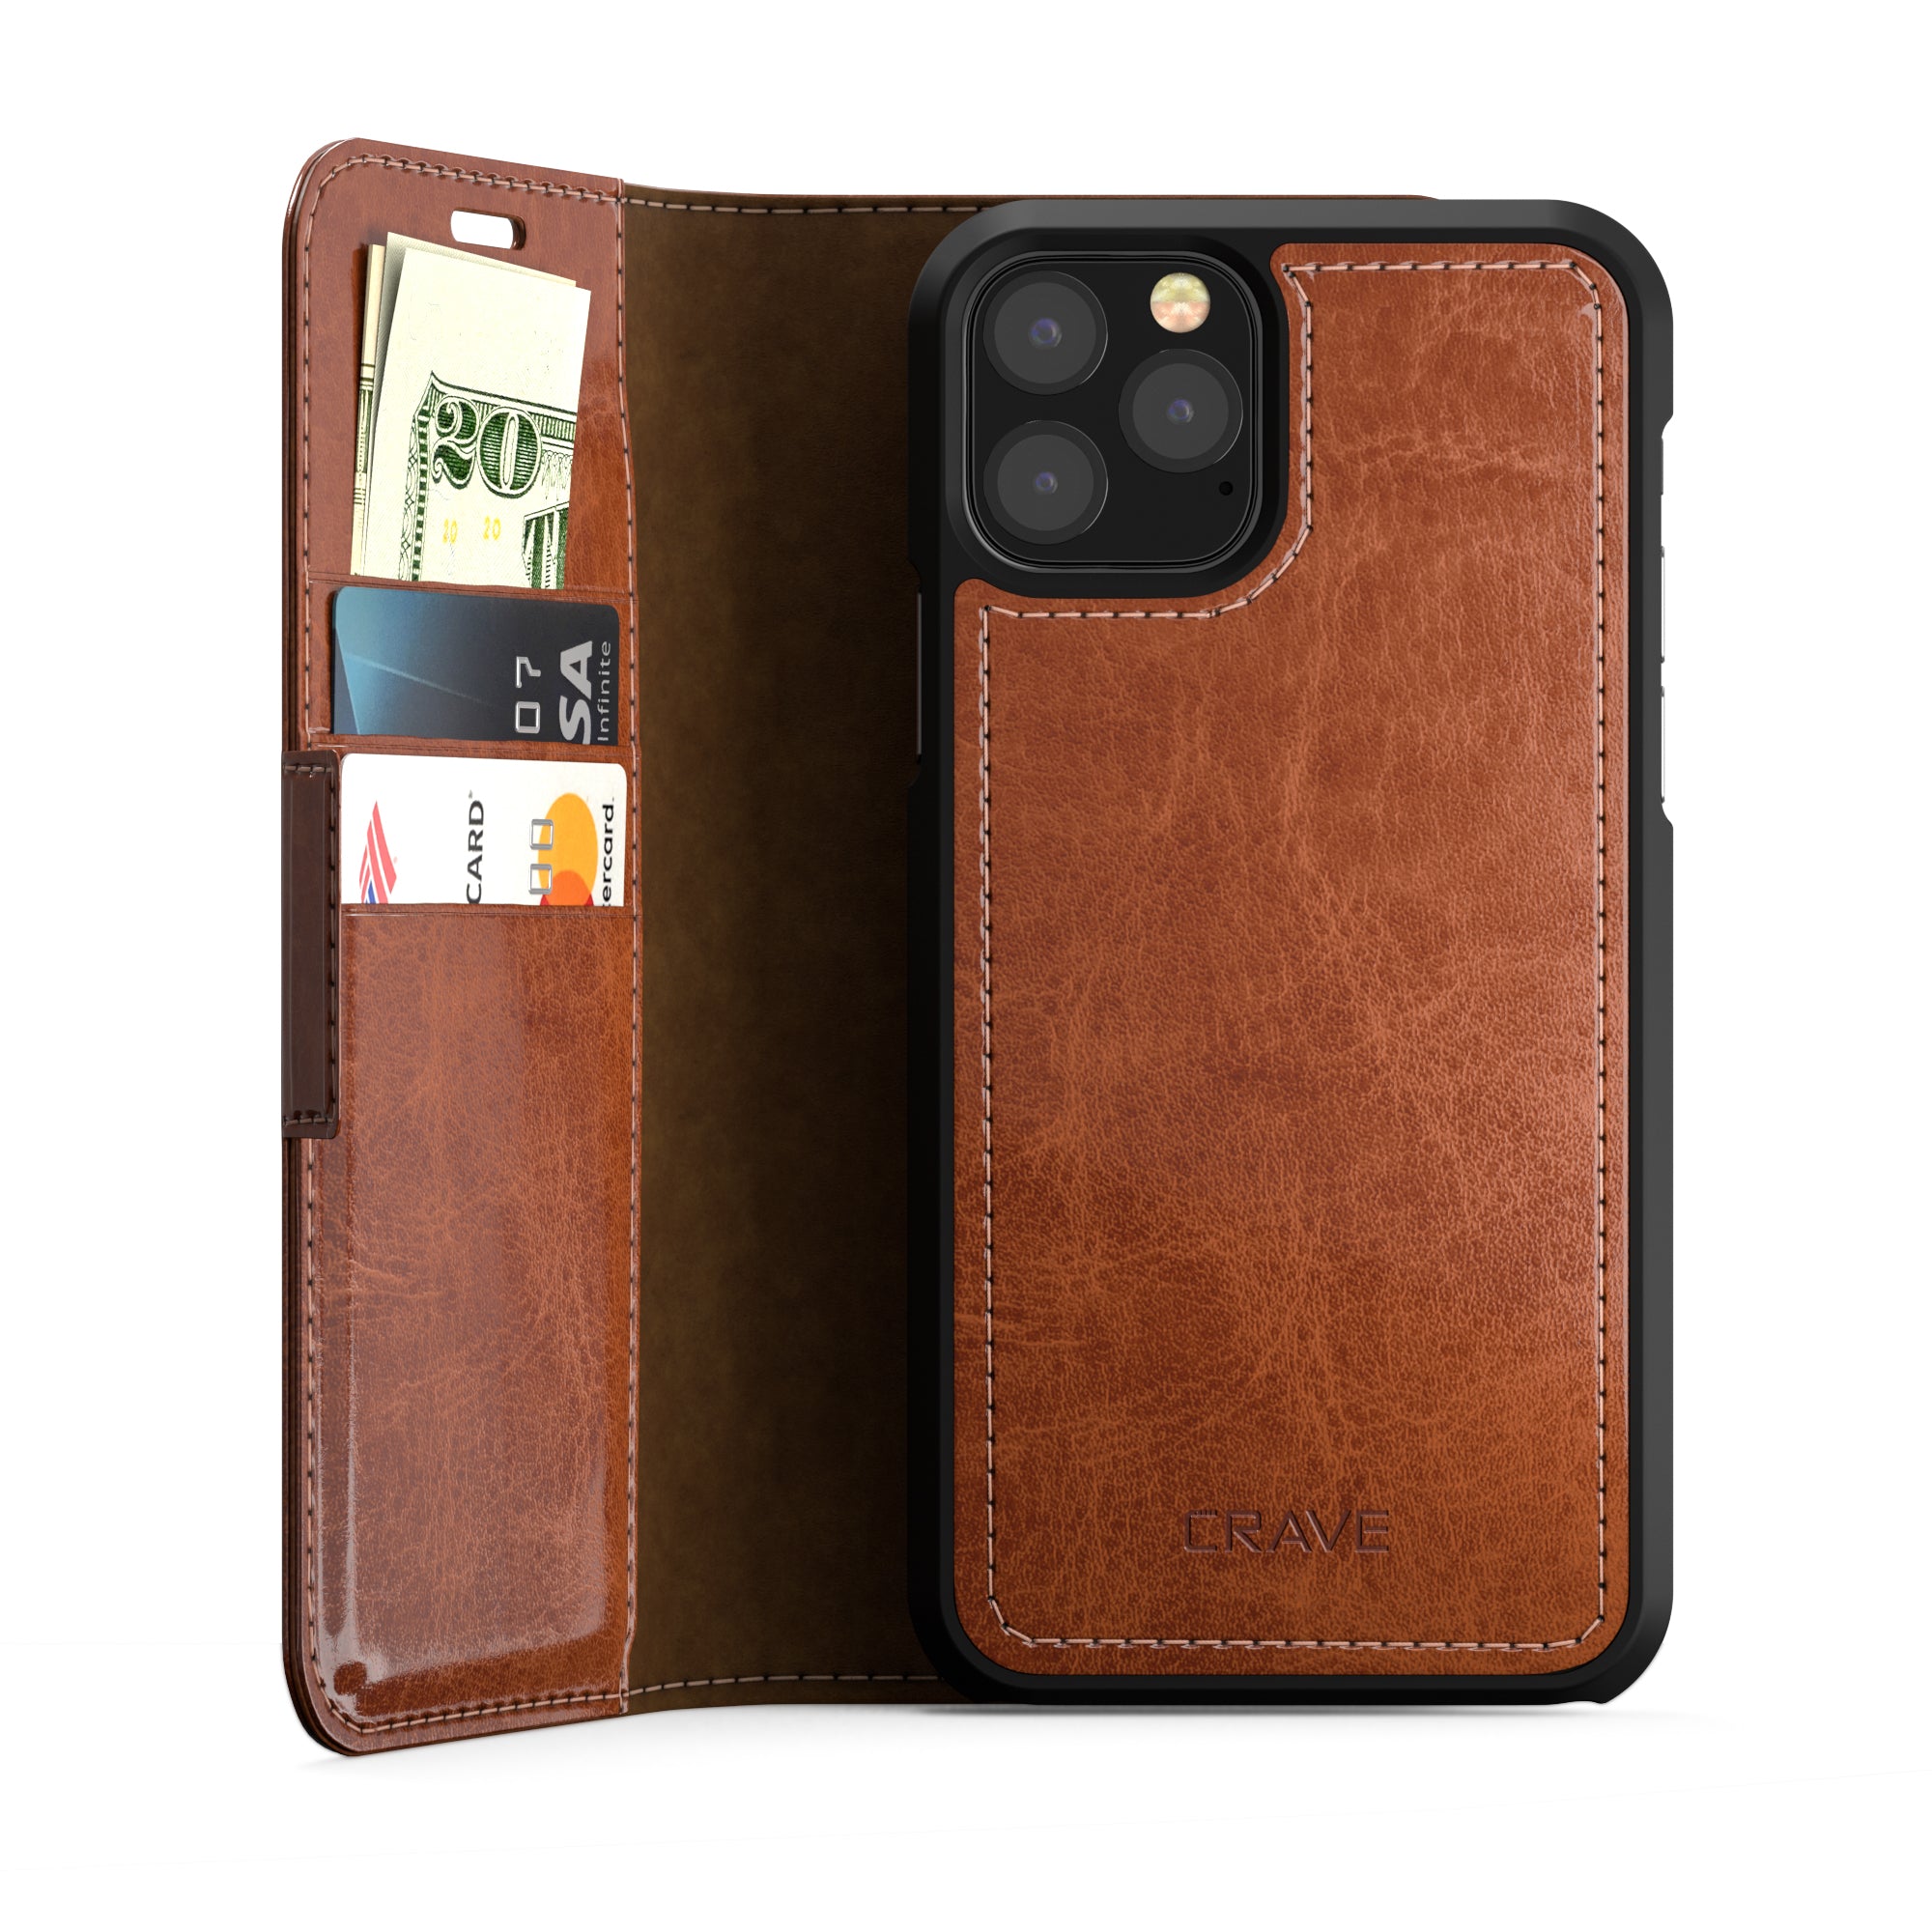 iPhone 11 Pro Case Vegan Leather Wallet, Leather Guard